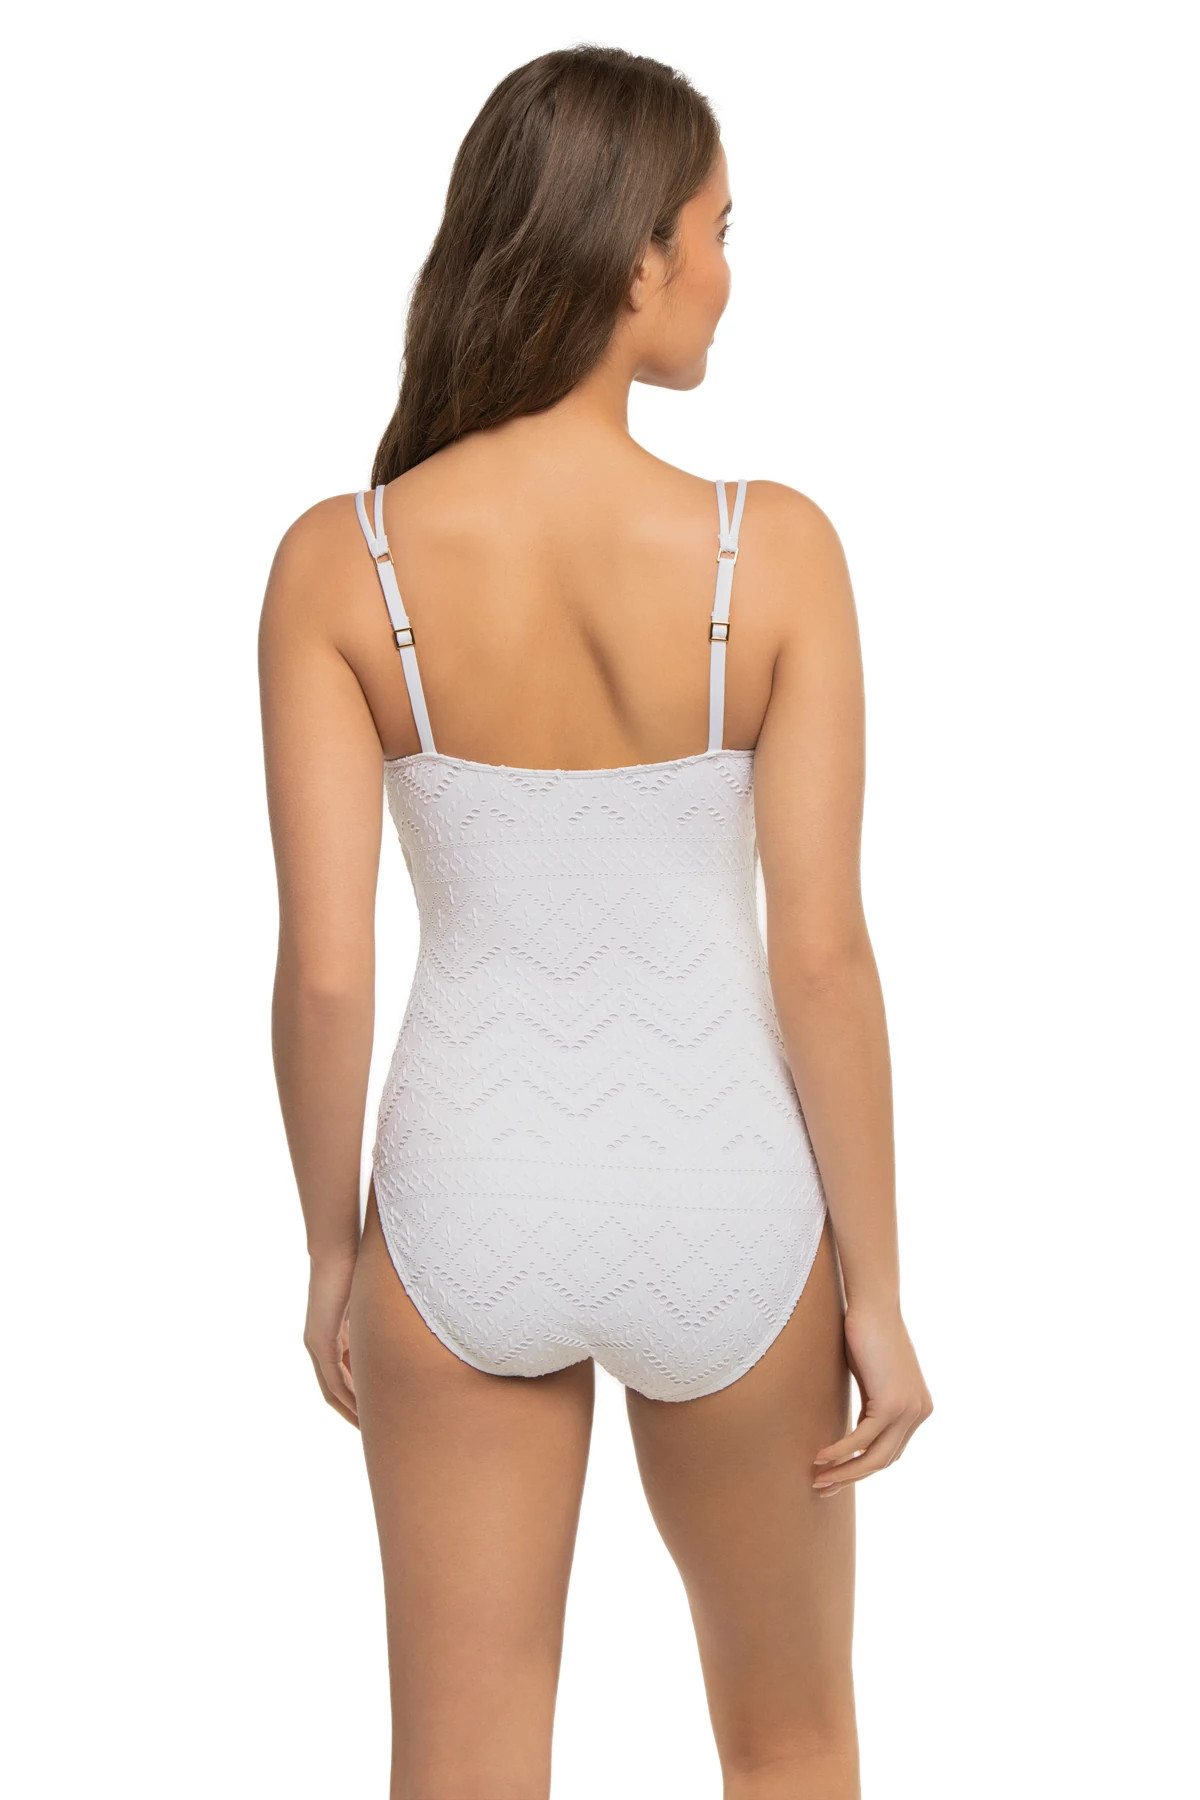 WHITE Saltwater Sands Lingerie One Piece Swimsuit image number 2